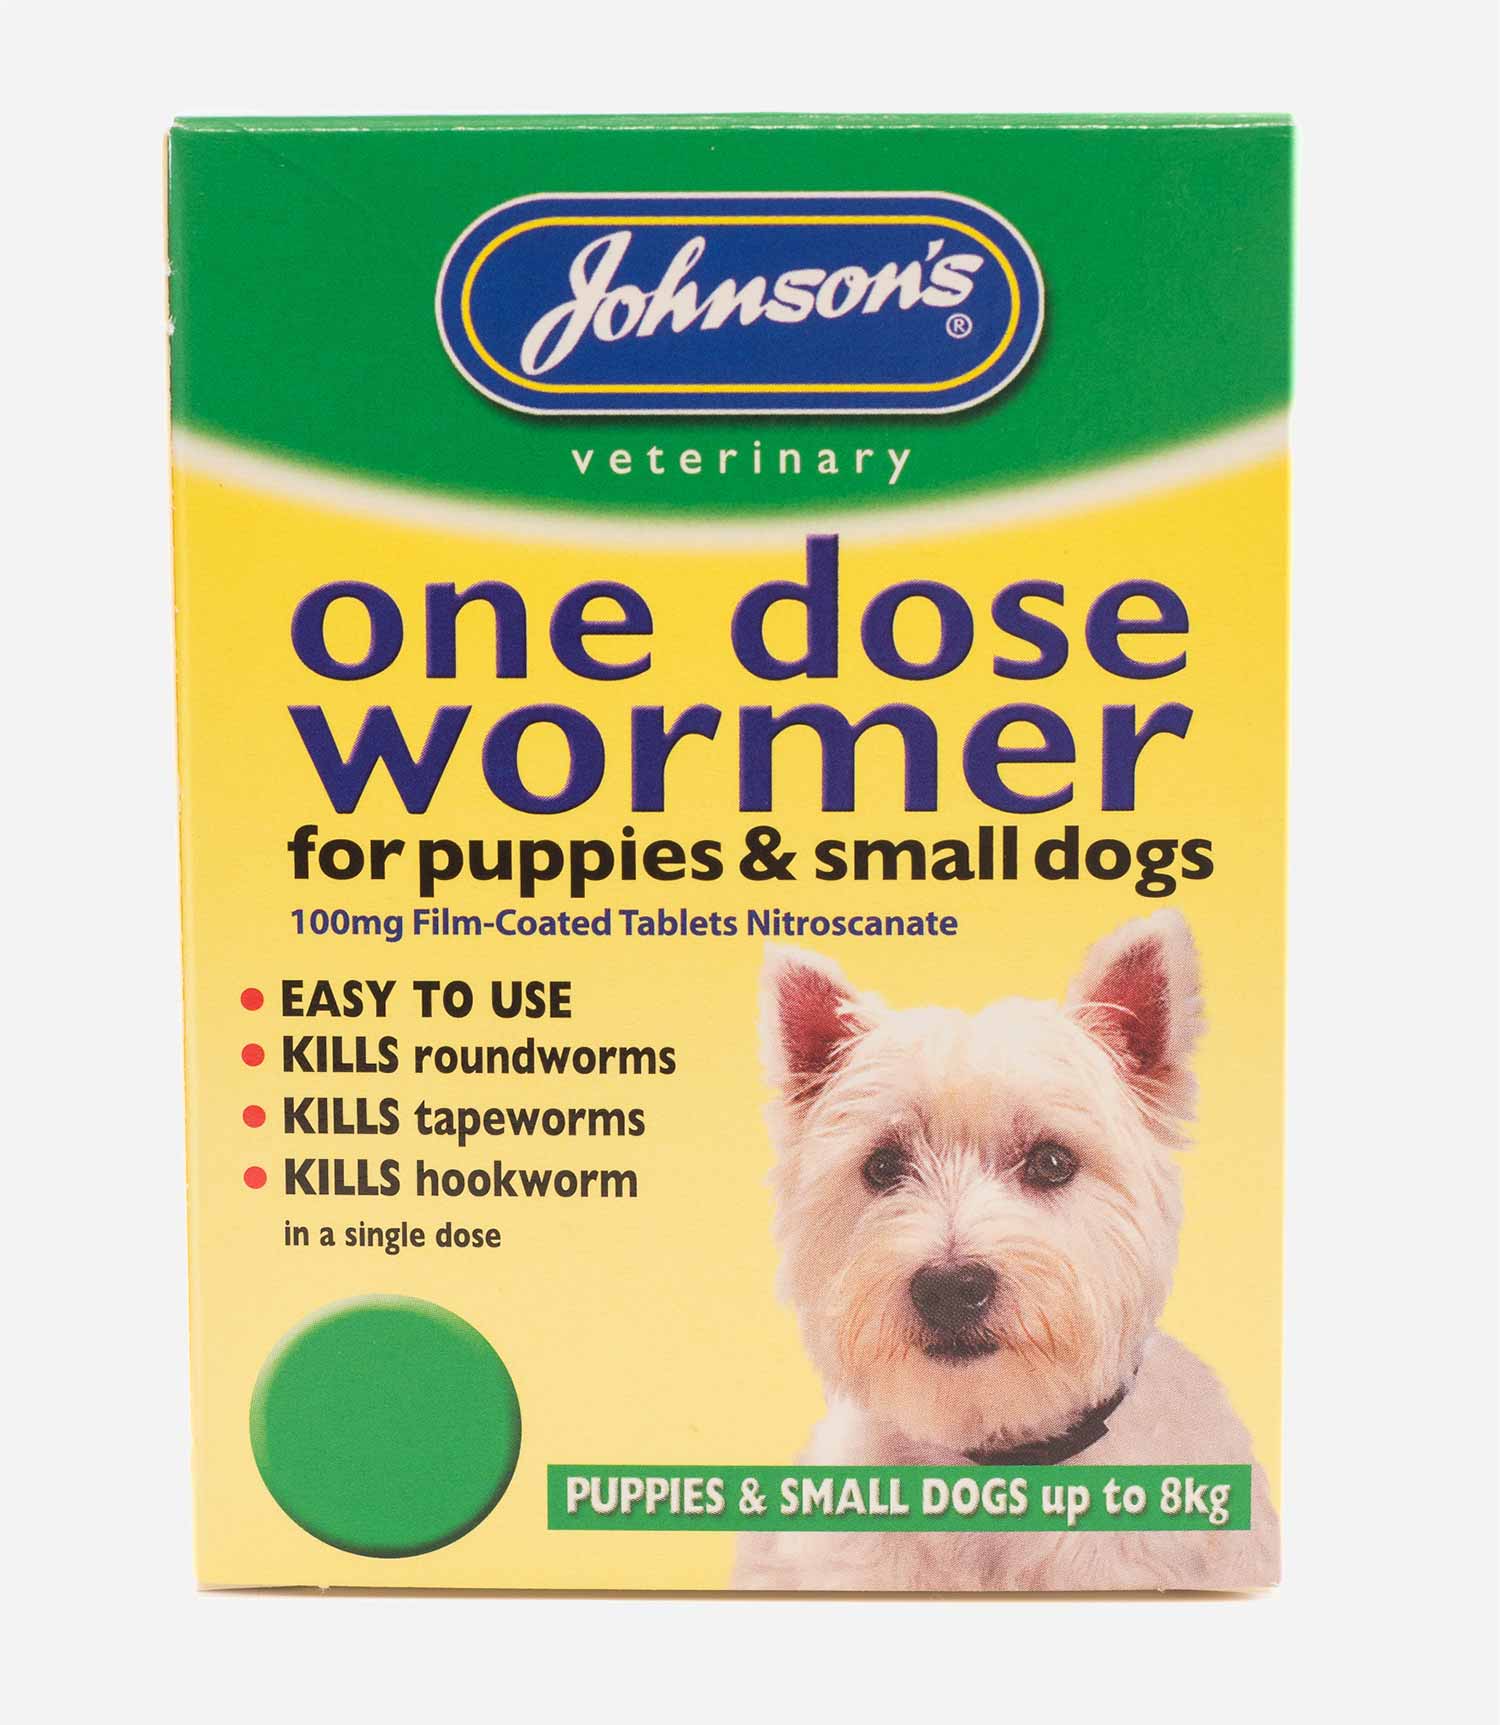 Johnson's One Dose Easy Wormer - Nest Pets